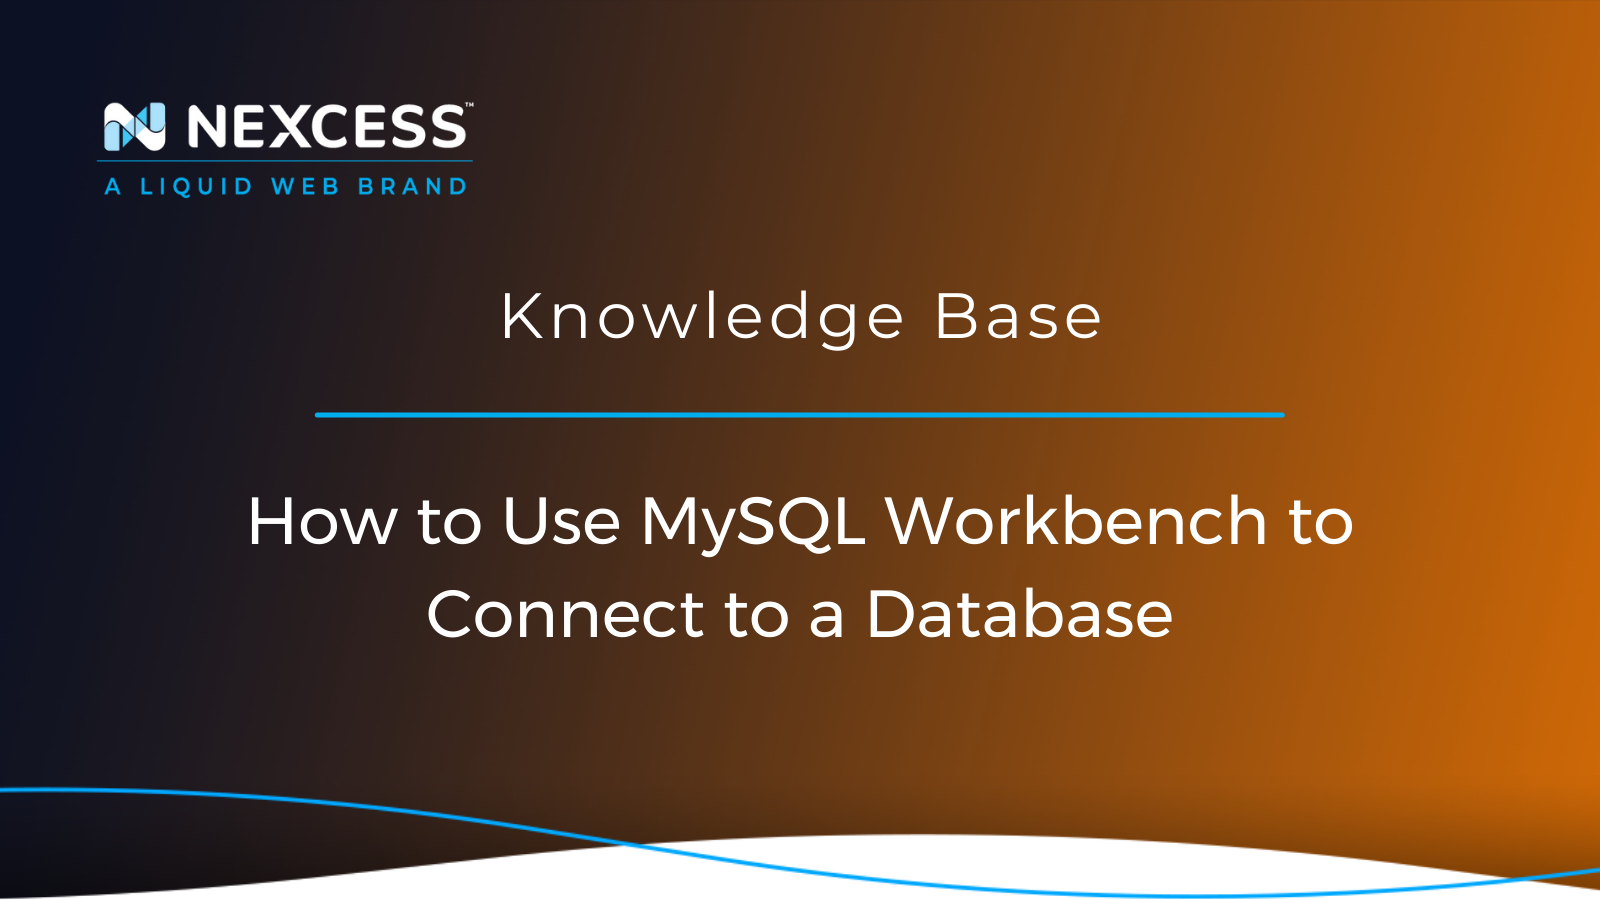 How to Use MySQL Workbench to Connect to a Database